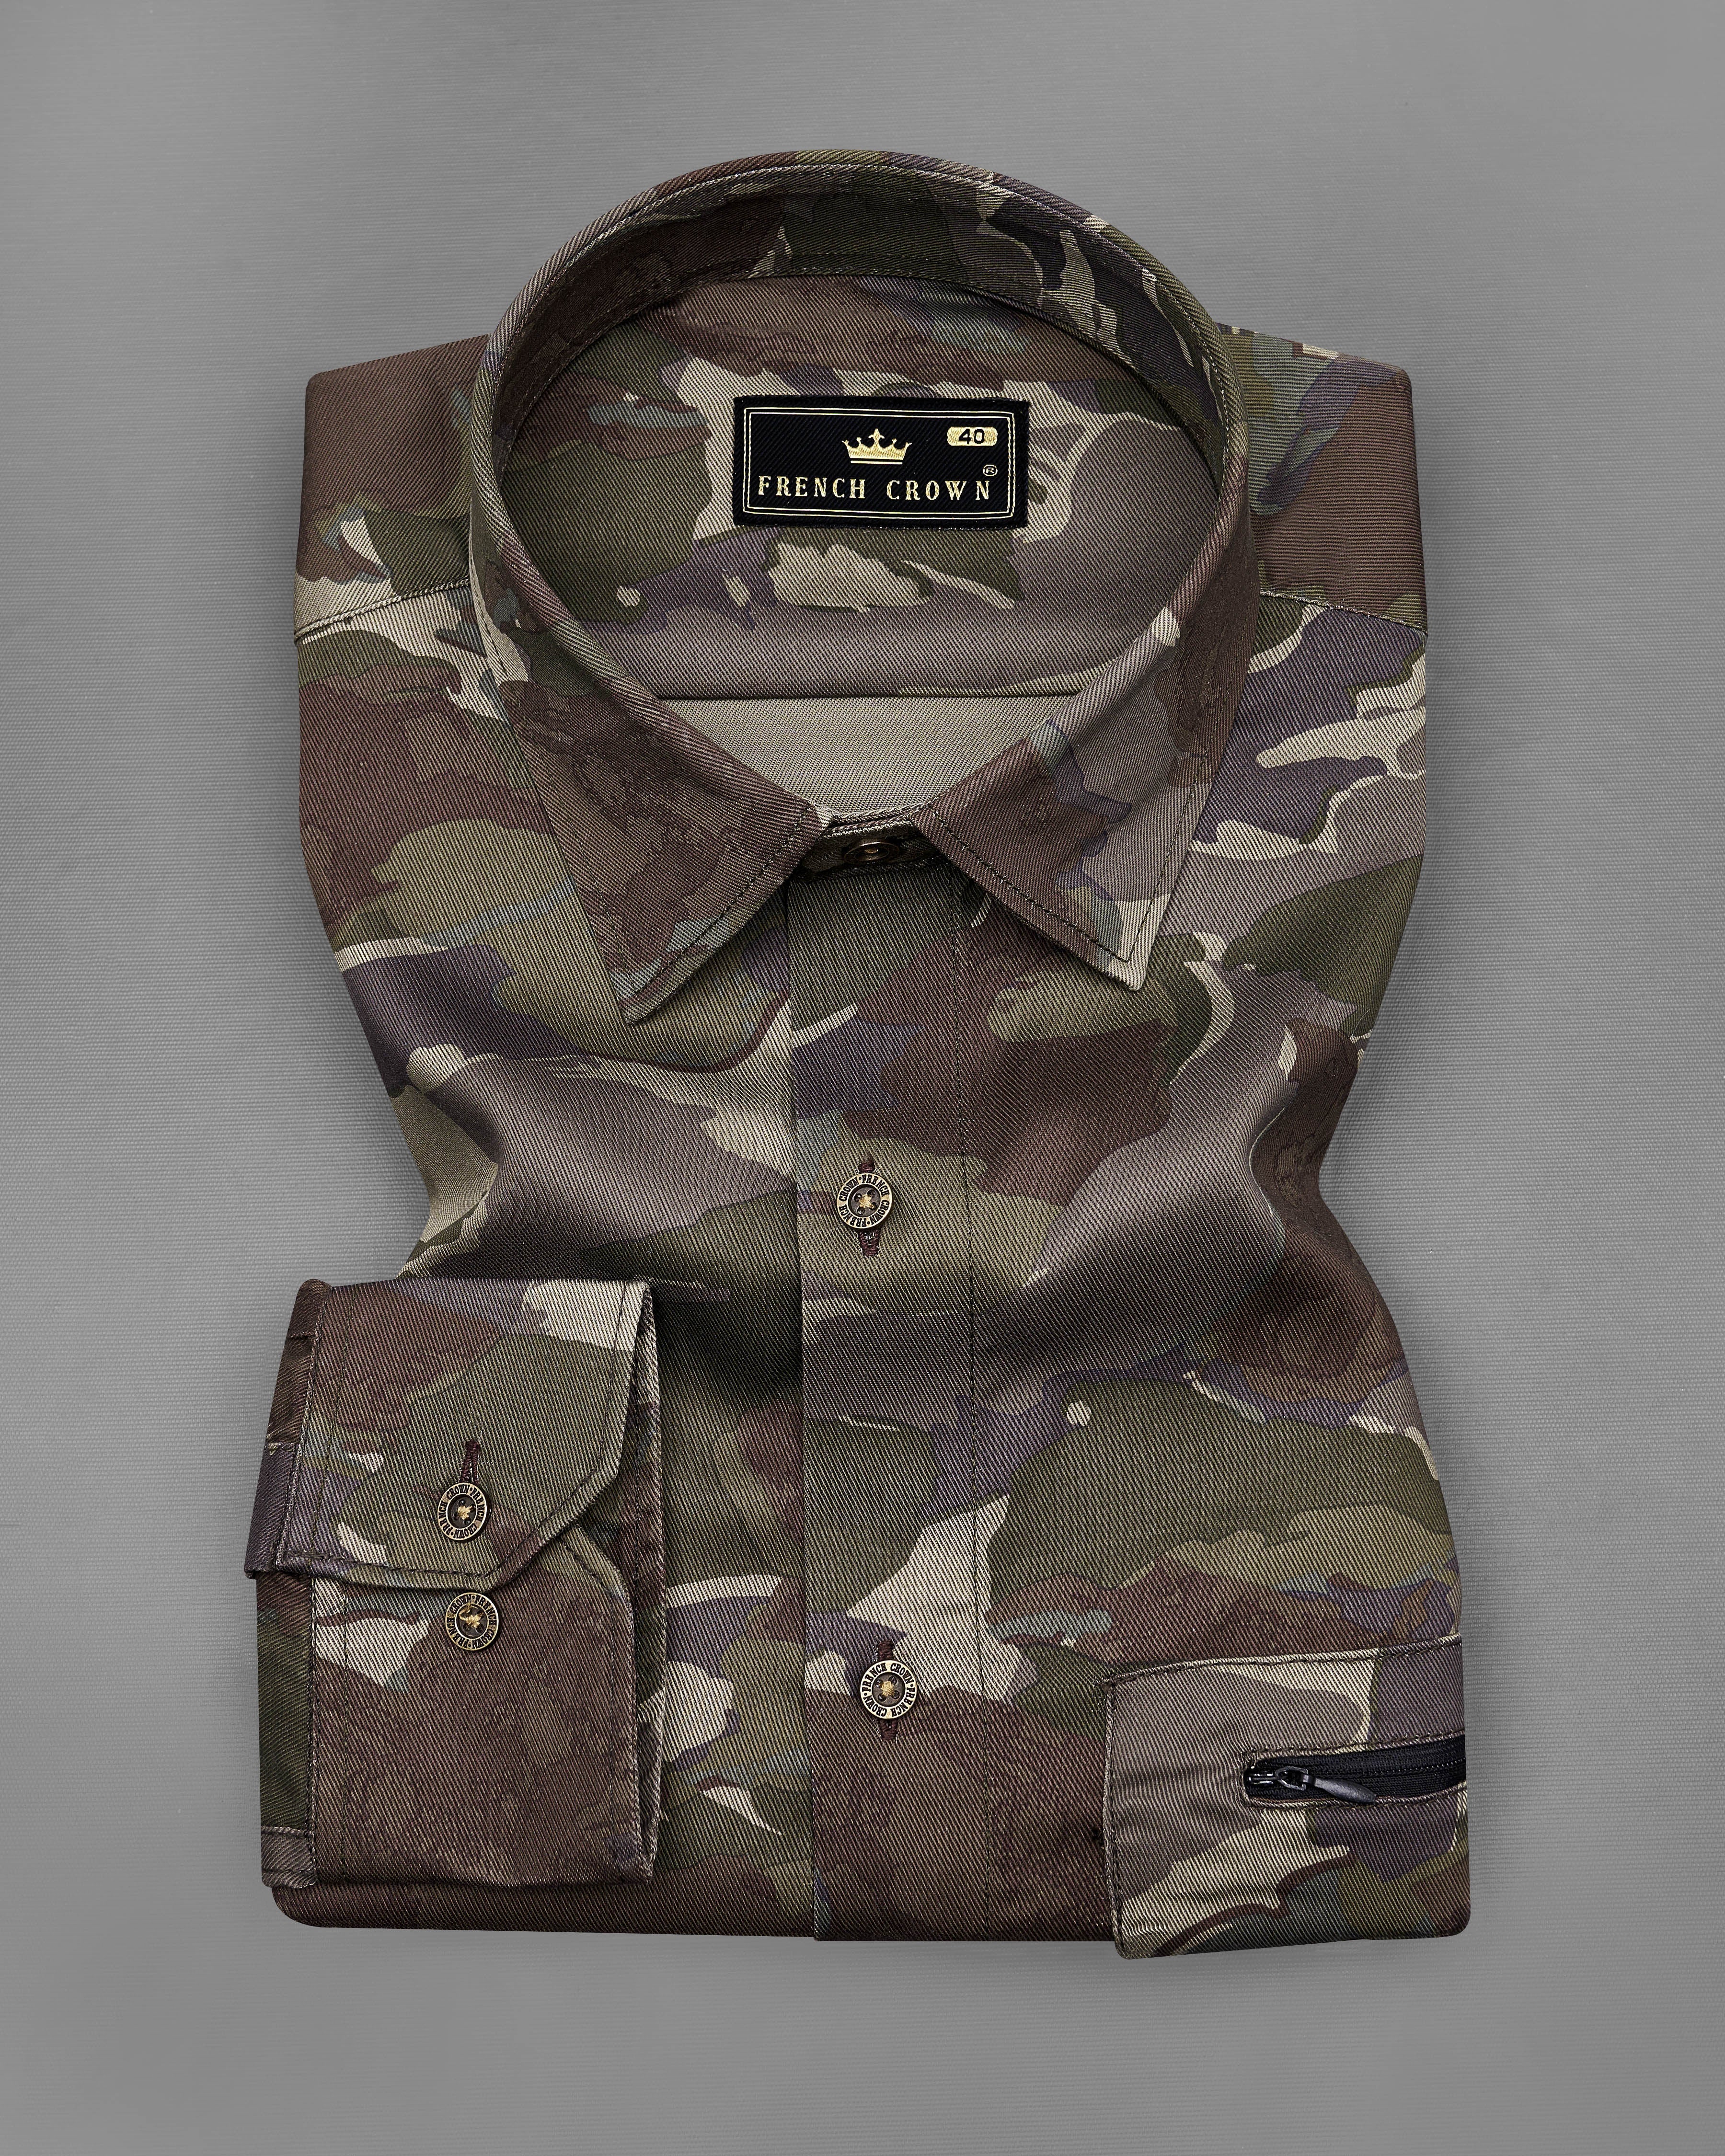 Rebel Brown with Rifle Green Multicoloured Camouflage Military Printed Royal Oxford Designer Shirt 8908-MB-P345-38, 8908-MB-P345-H-38,  8908-MB-P345-39,  8908-MB-P345-H-39,  8908-MB-P345-40,  8908-MB-P345-H-40,  8908-MB-P345-42,  8908-MB-P345-H-42,  8908-MB-P345-44,  8908-MB-P345-H-44,  8908-MB-P345-46,  8908-MB-P345-H-46,  8908-MB-P345-48,  8908-MB-P345-H-48,  8908-MB-P345-50,  8908-MB-P345-H-50,  8908-MB-P345-52,  8908-MB-P345-H-52